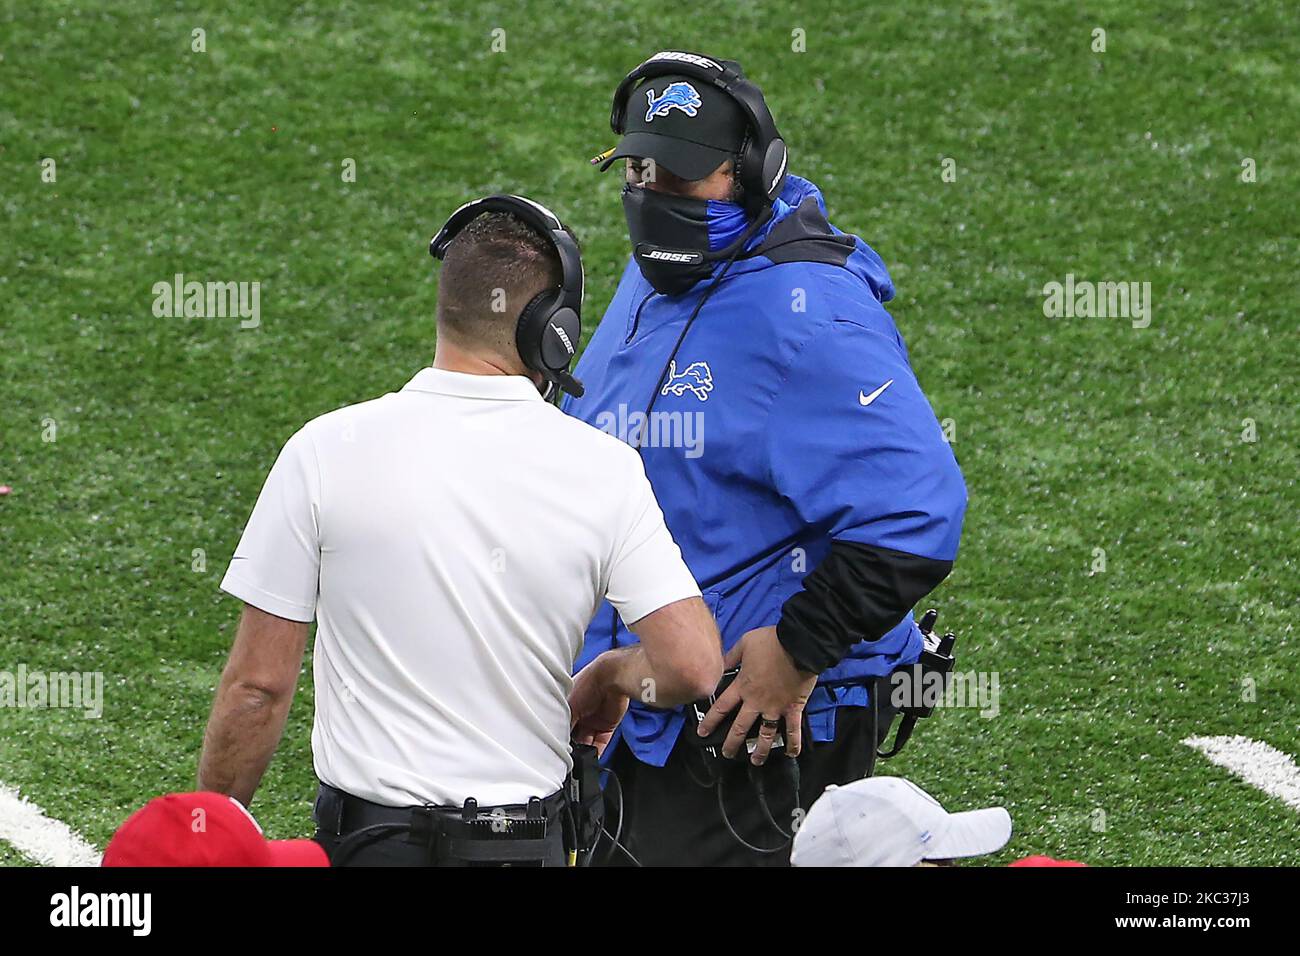 Detroit Lions head coach Matt Patricia talks with staff at the sidelines during the second half of an NFL football game against the Indianapolis Colts in Detroit, Michigan USA, on Sunday, November 1, 2020. (Photo by Amy Lemus/NurPhoto) Stock Photo